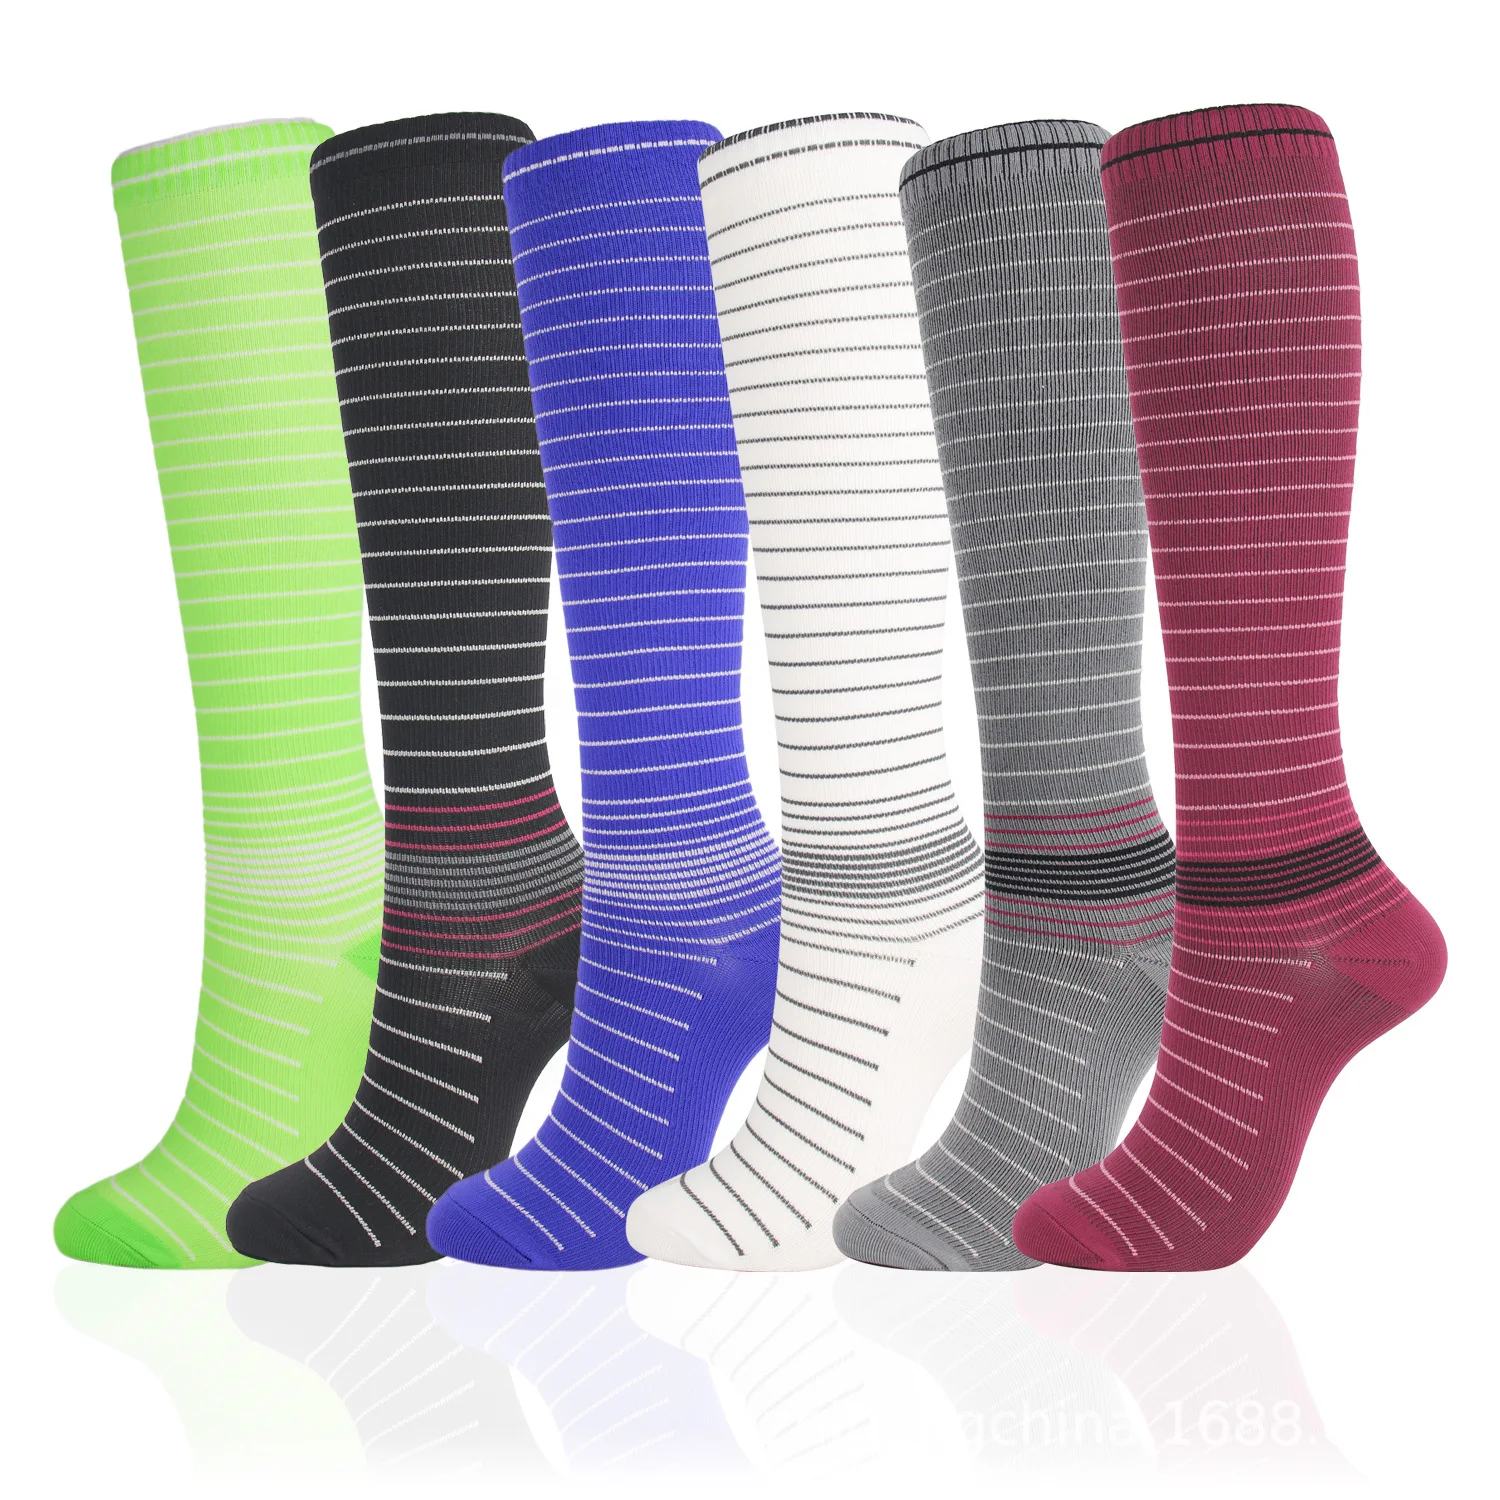 Men's Compression Socks,15-20 MmHg Striped Knee High Quick Dry Crew Sport Socks for Athletic Cycling Running Travel Circulation